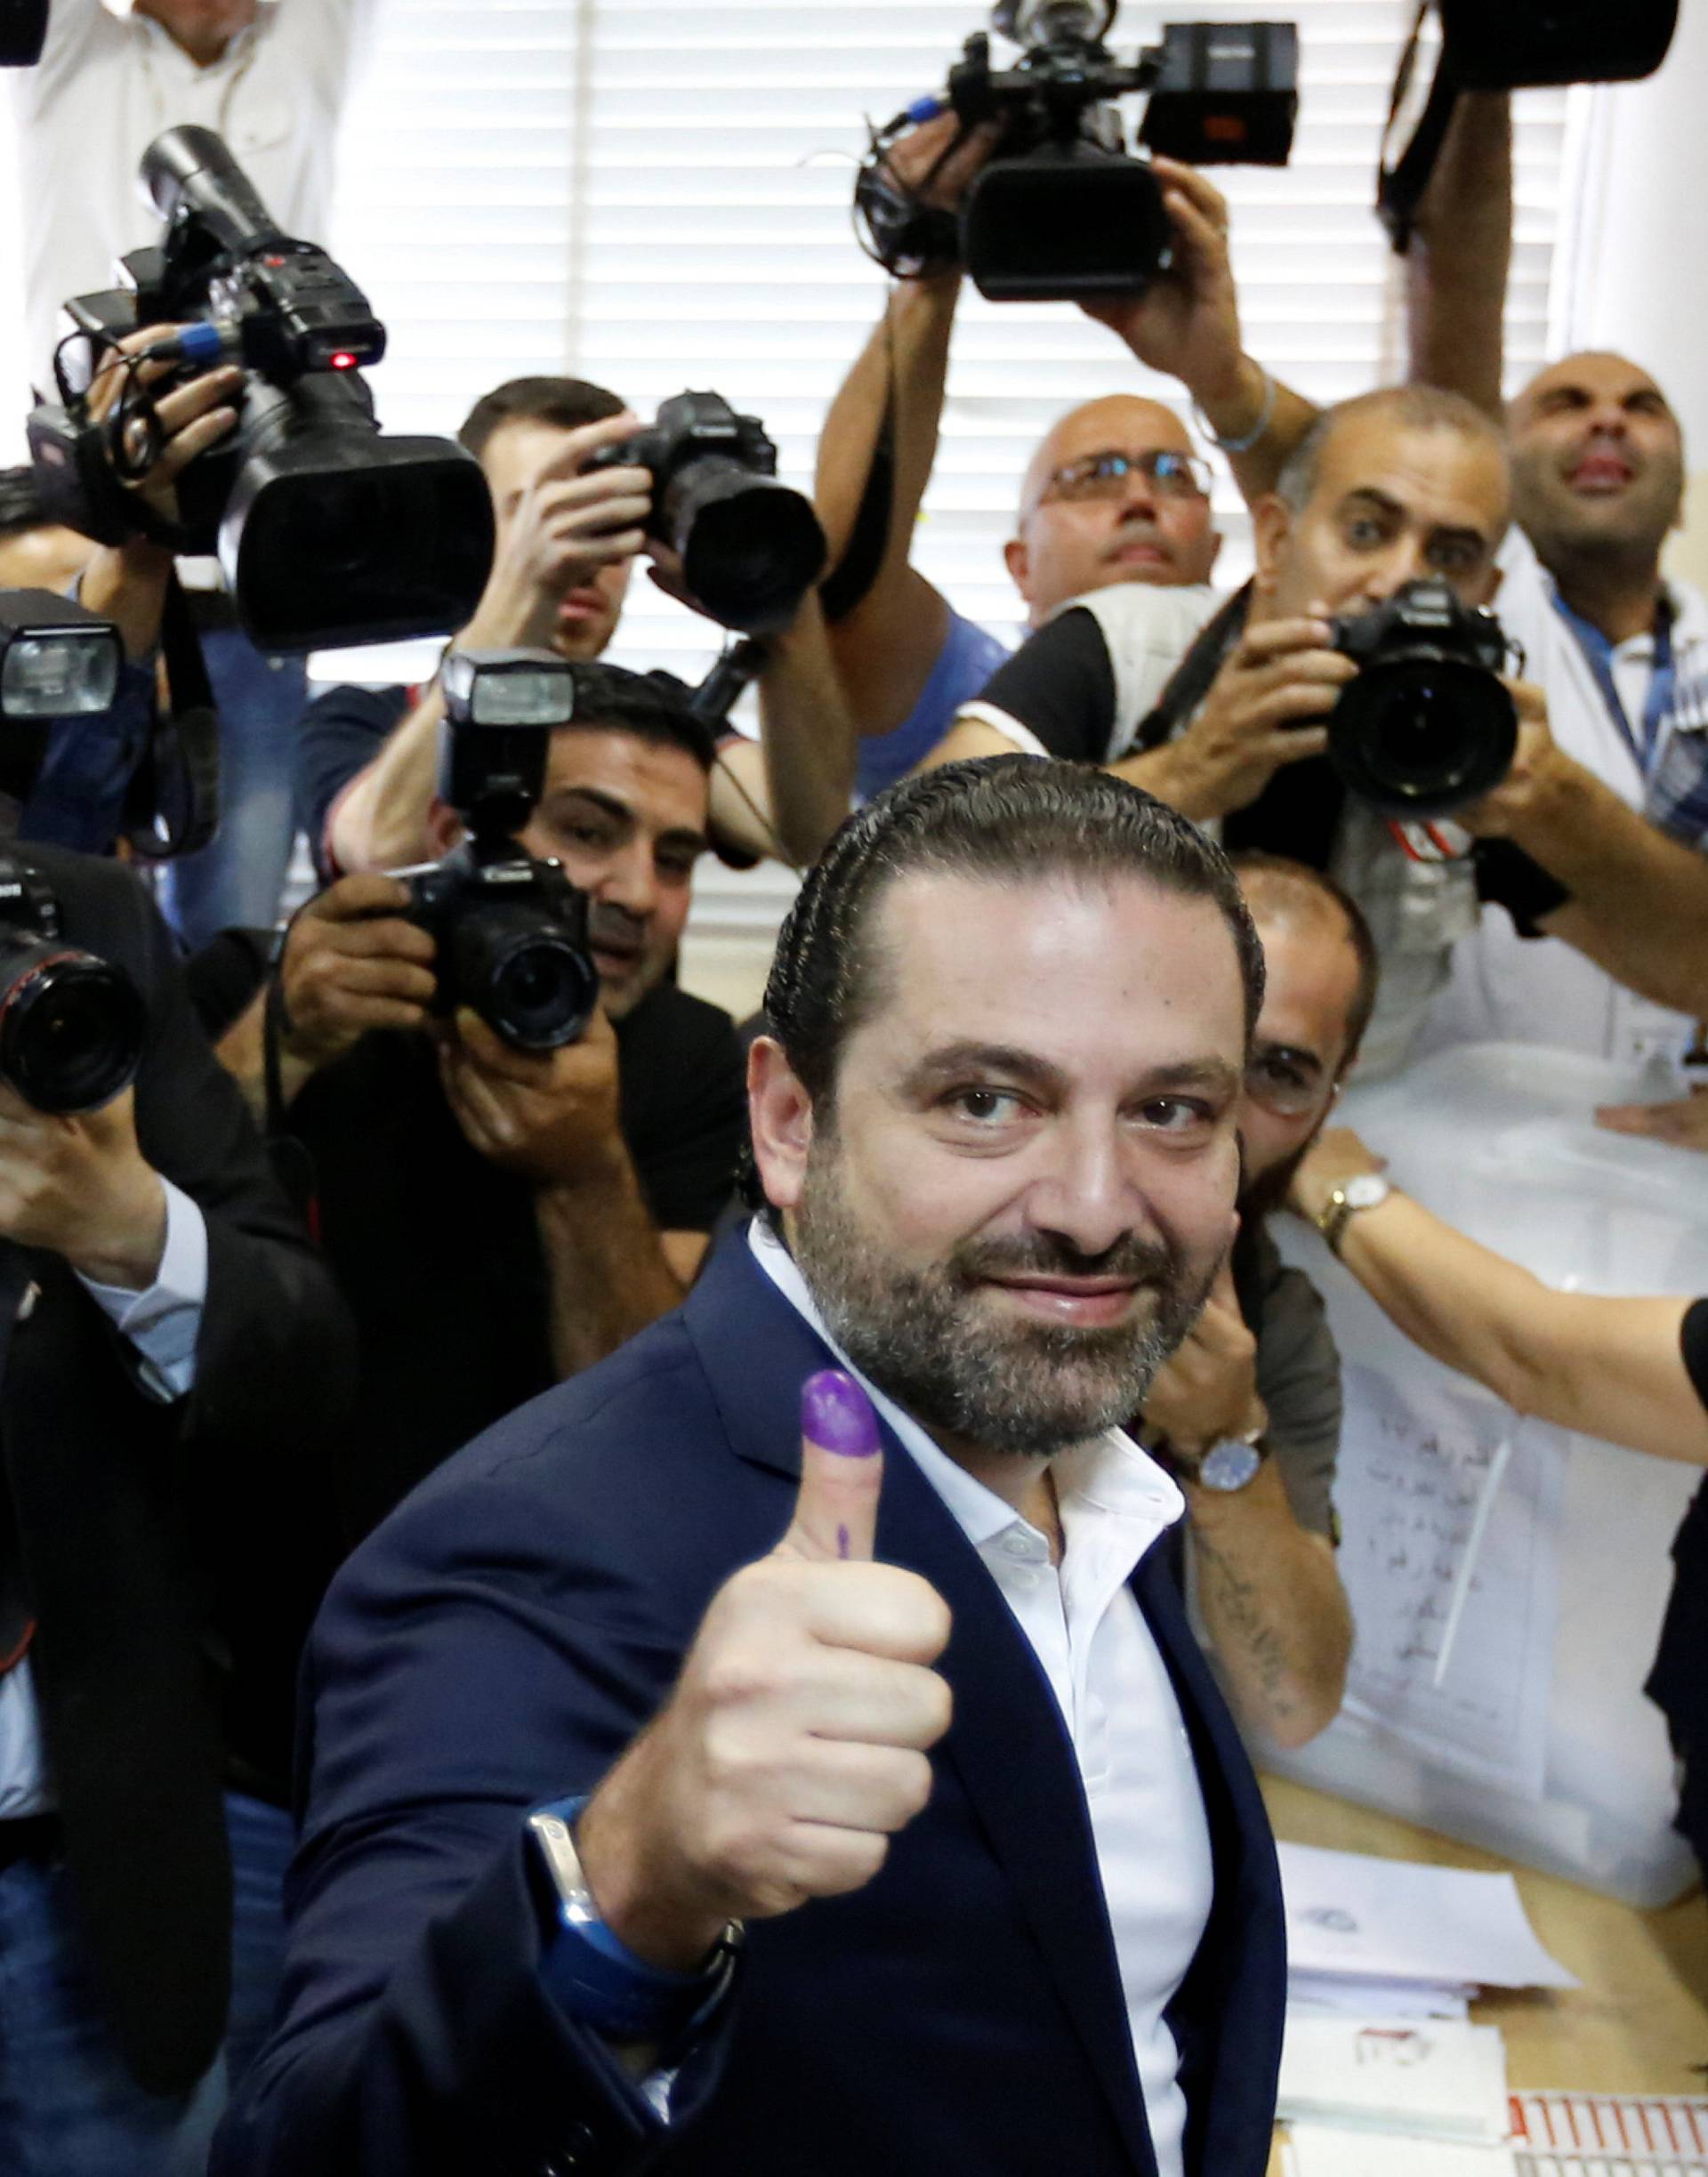 Lebanese prime minister and candidate for the parliamentary election Saad al-Hariri shows his ink-stained finger after casting his vote in Beirut